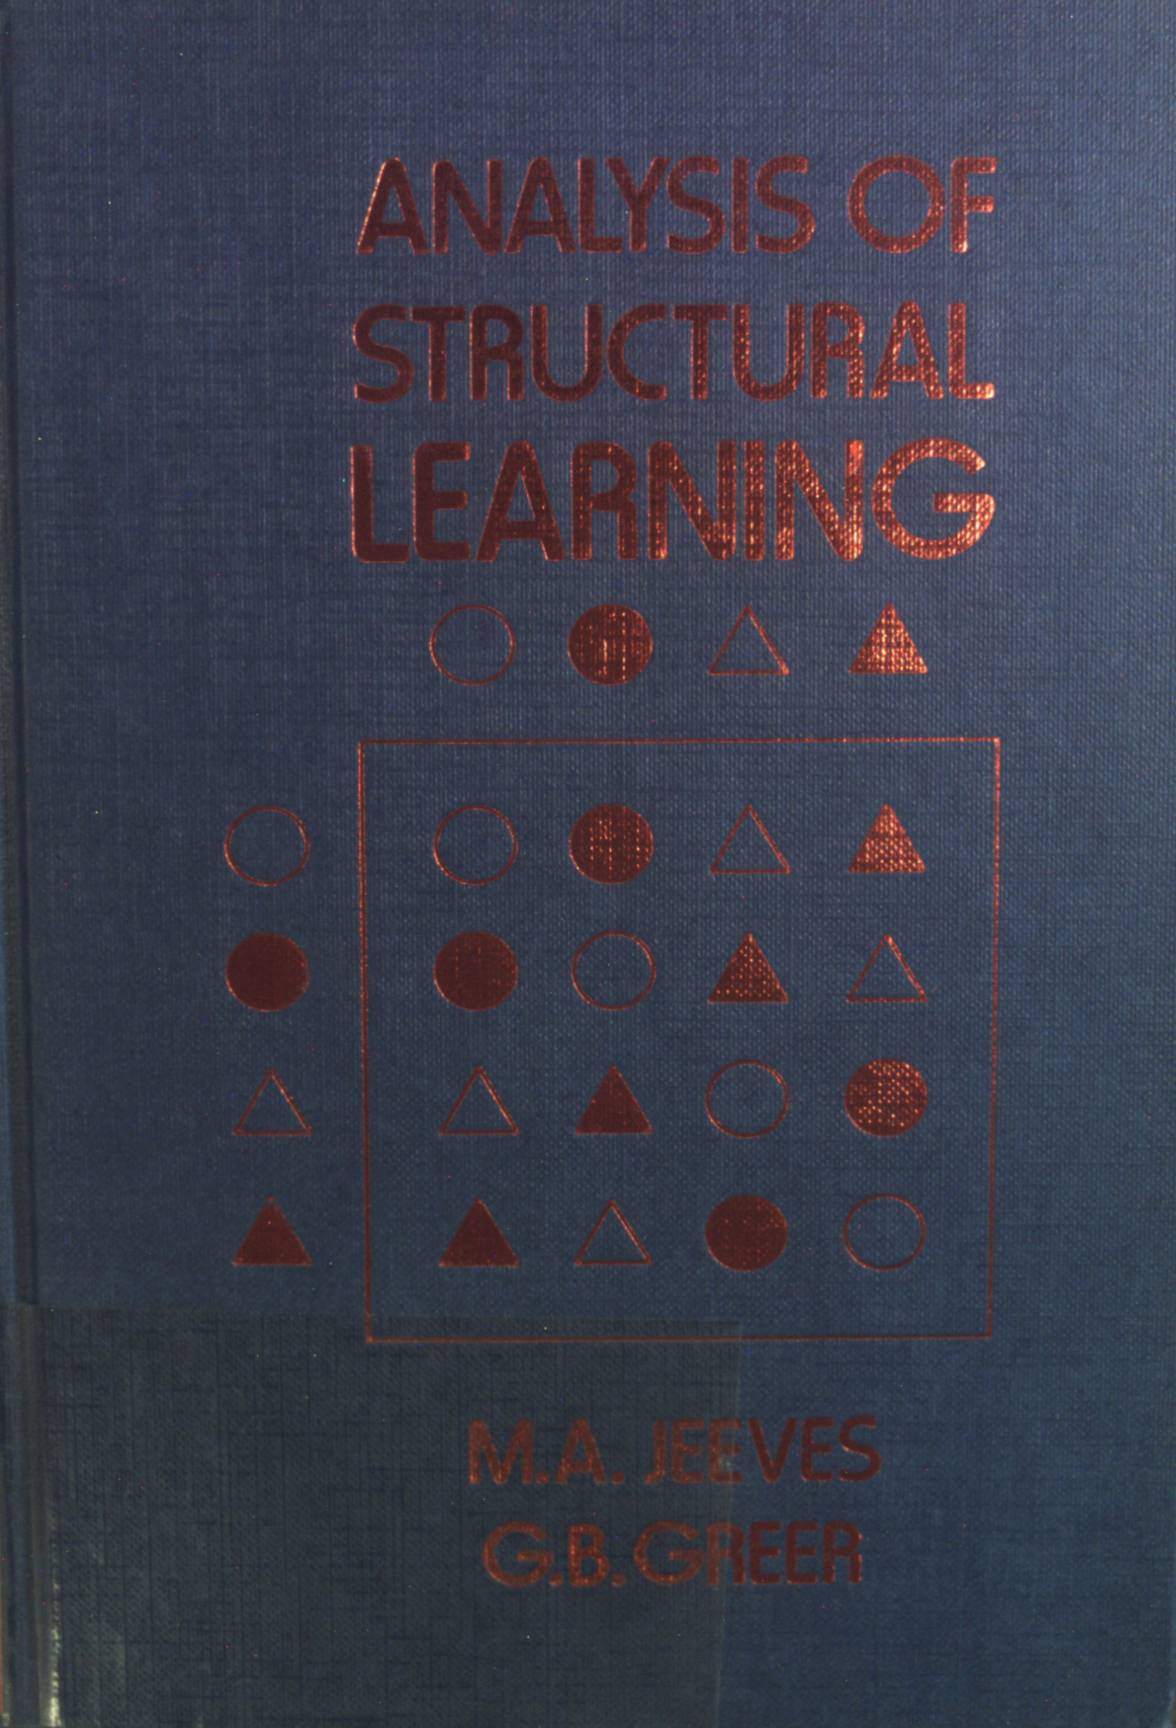 Analysis of Structural Learning. - Jeeves, M.A. and G.B. Greer